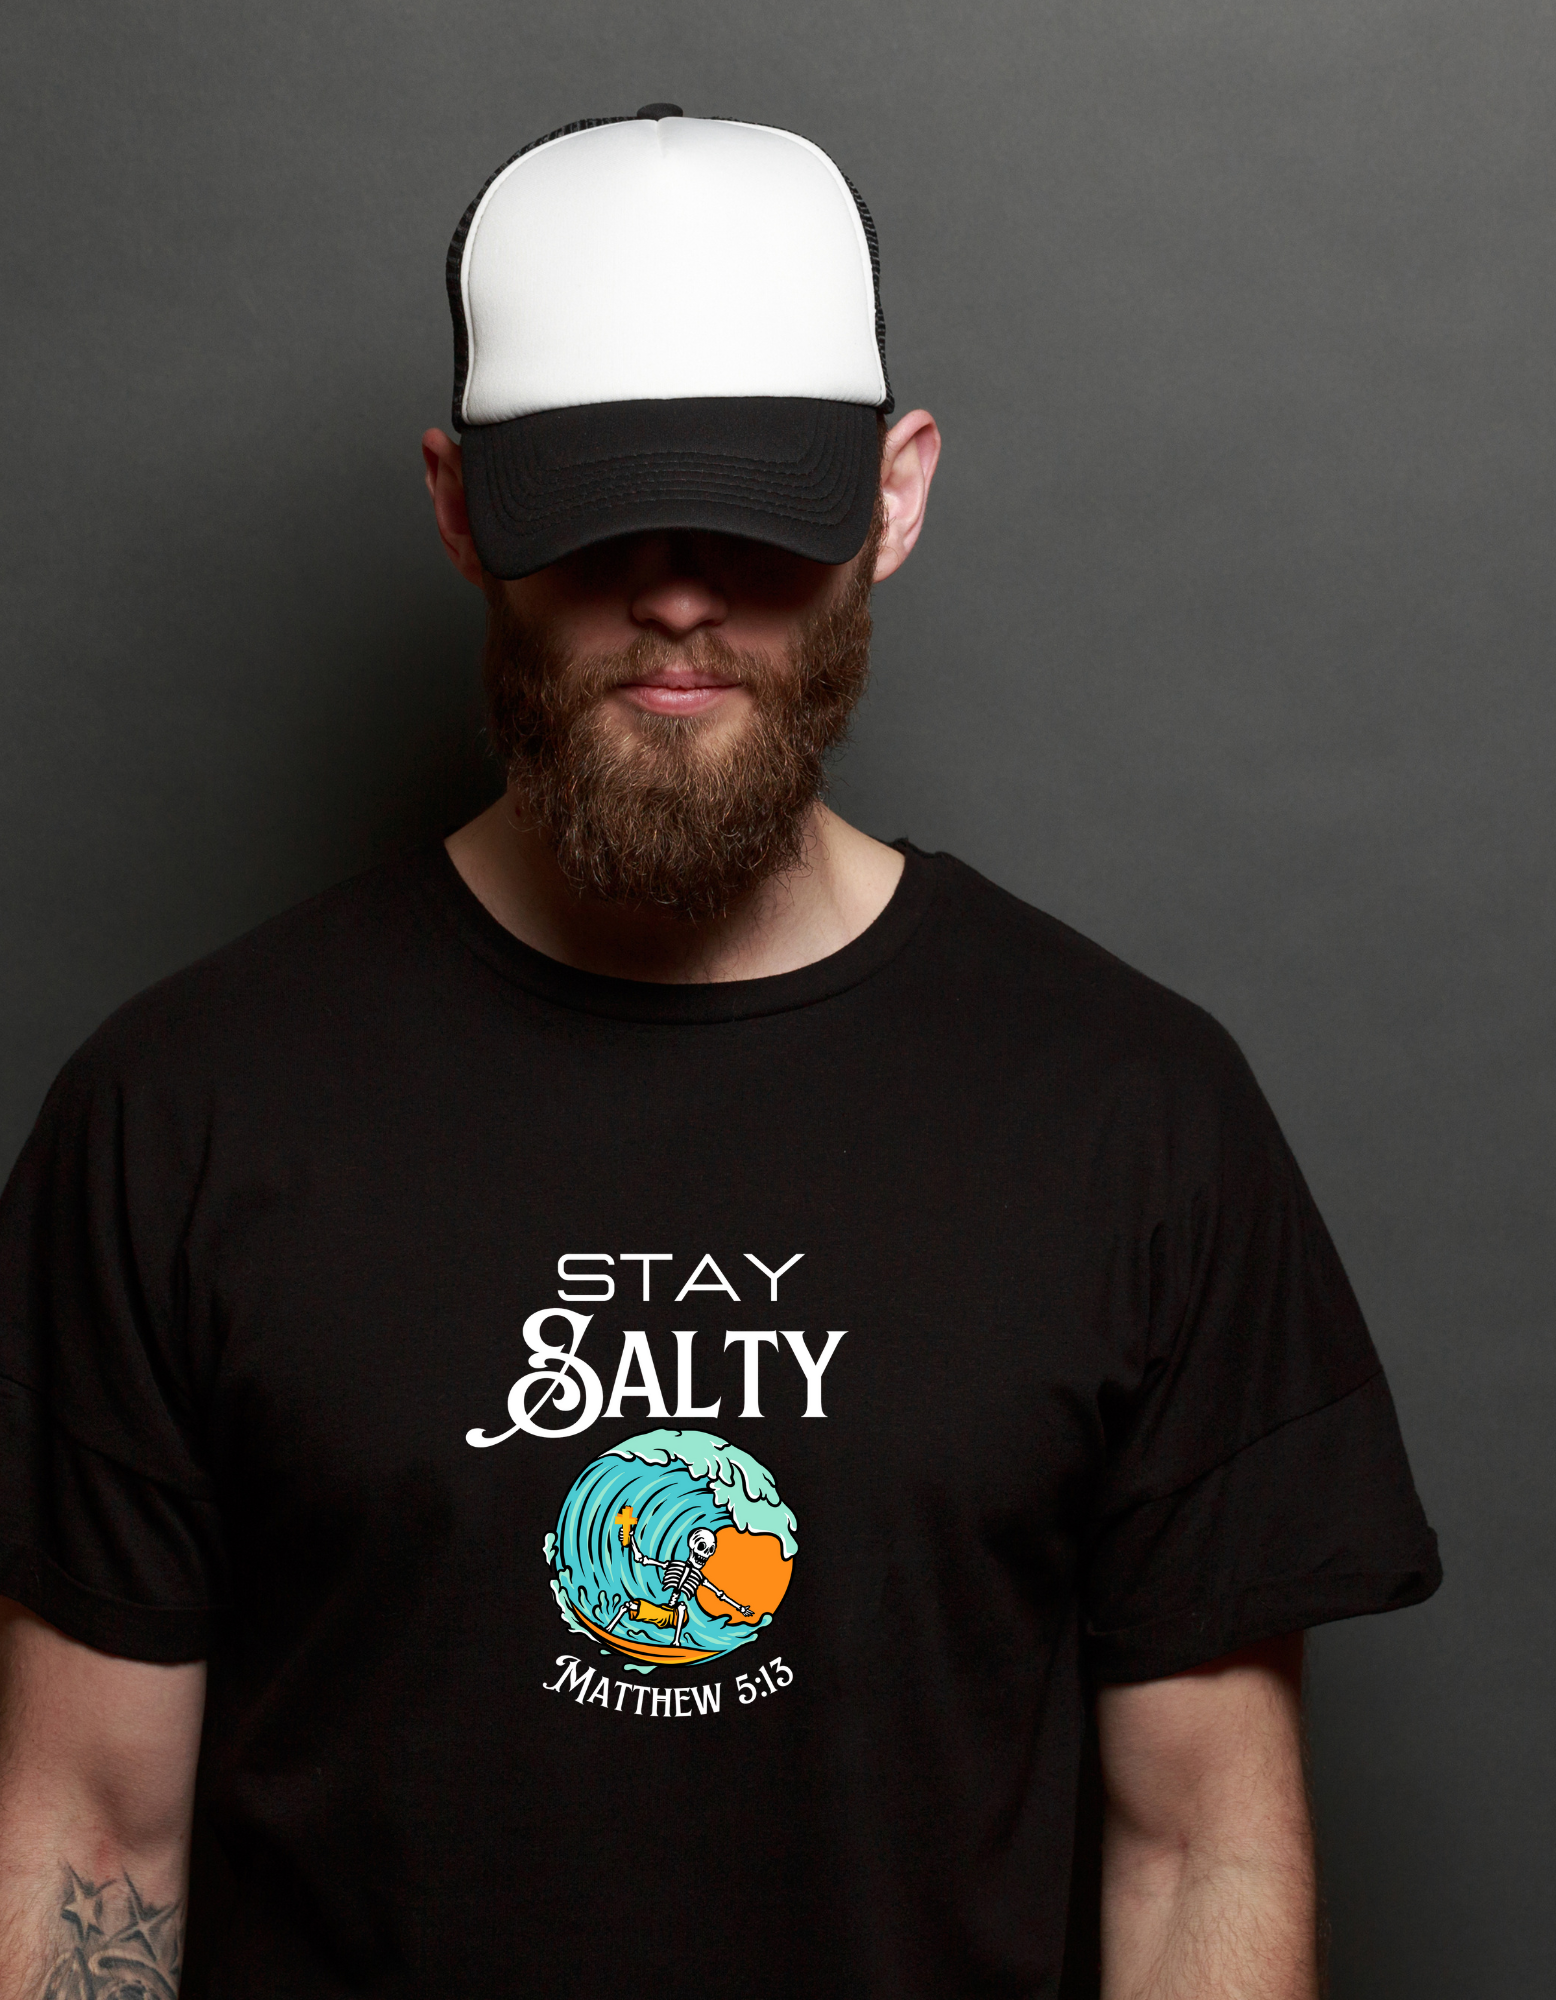 Black T-Shirt with Stay Salty printed above a wave with a skeleton riding the wave on a surfboard holding a cross. Below the wave it says Matthew 5:13.